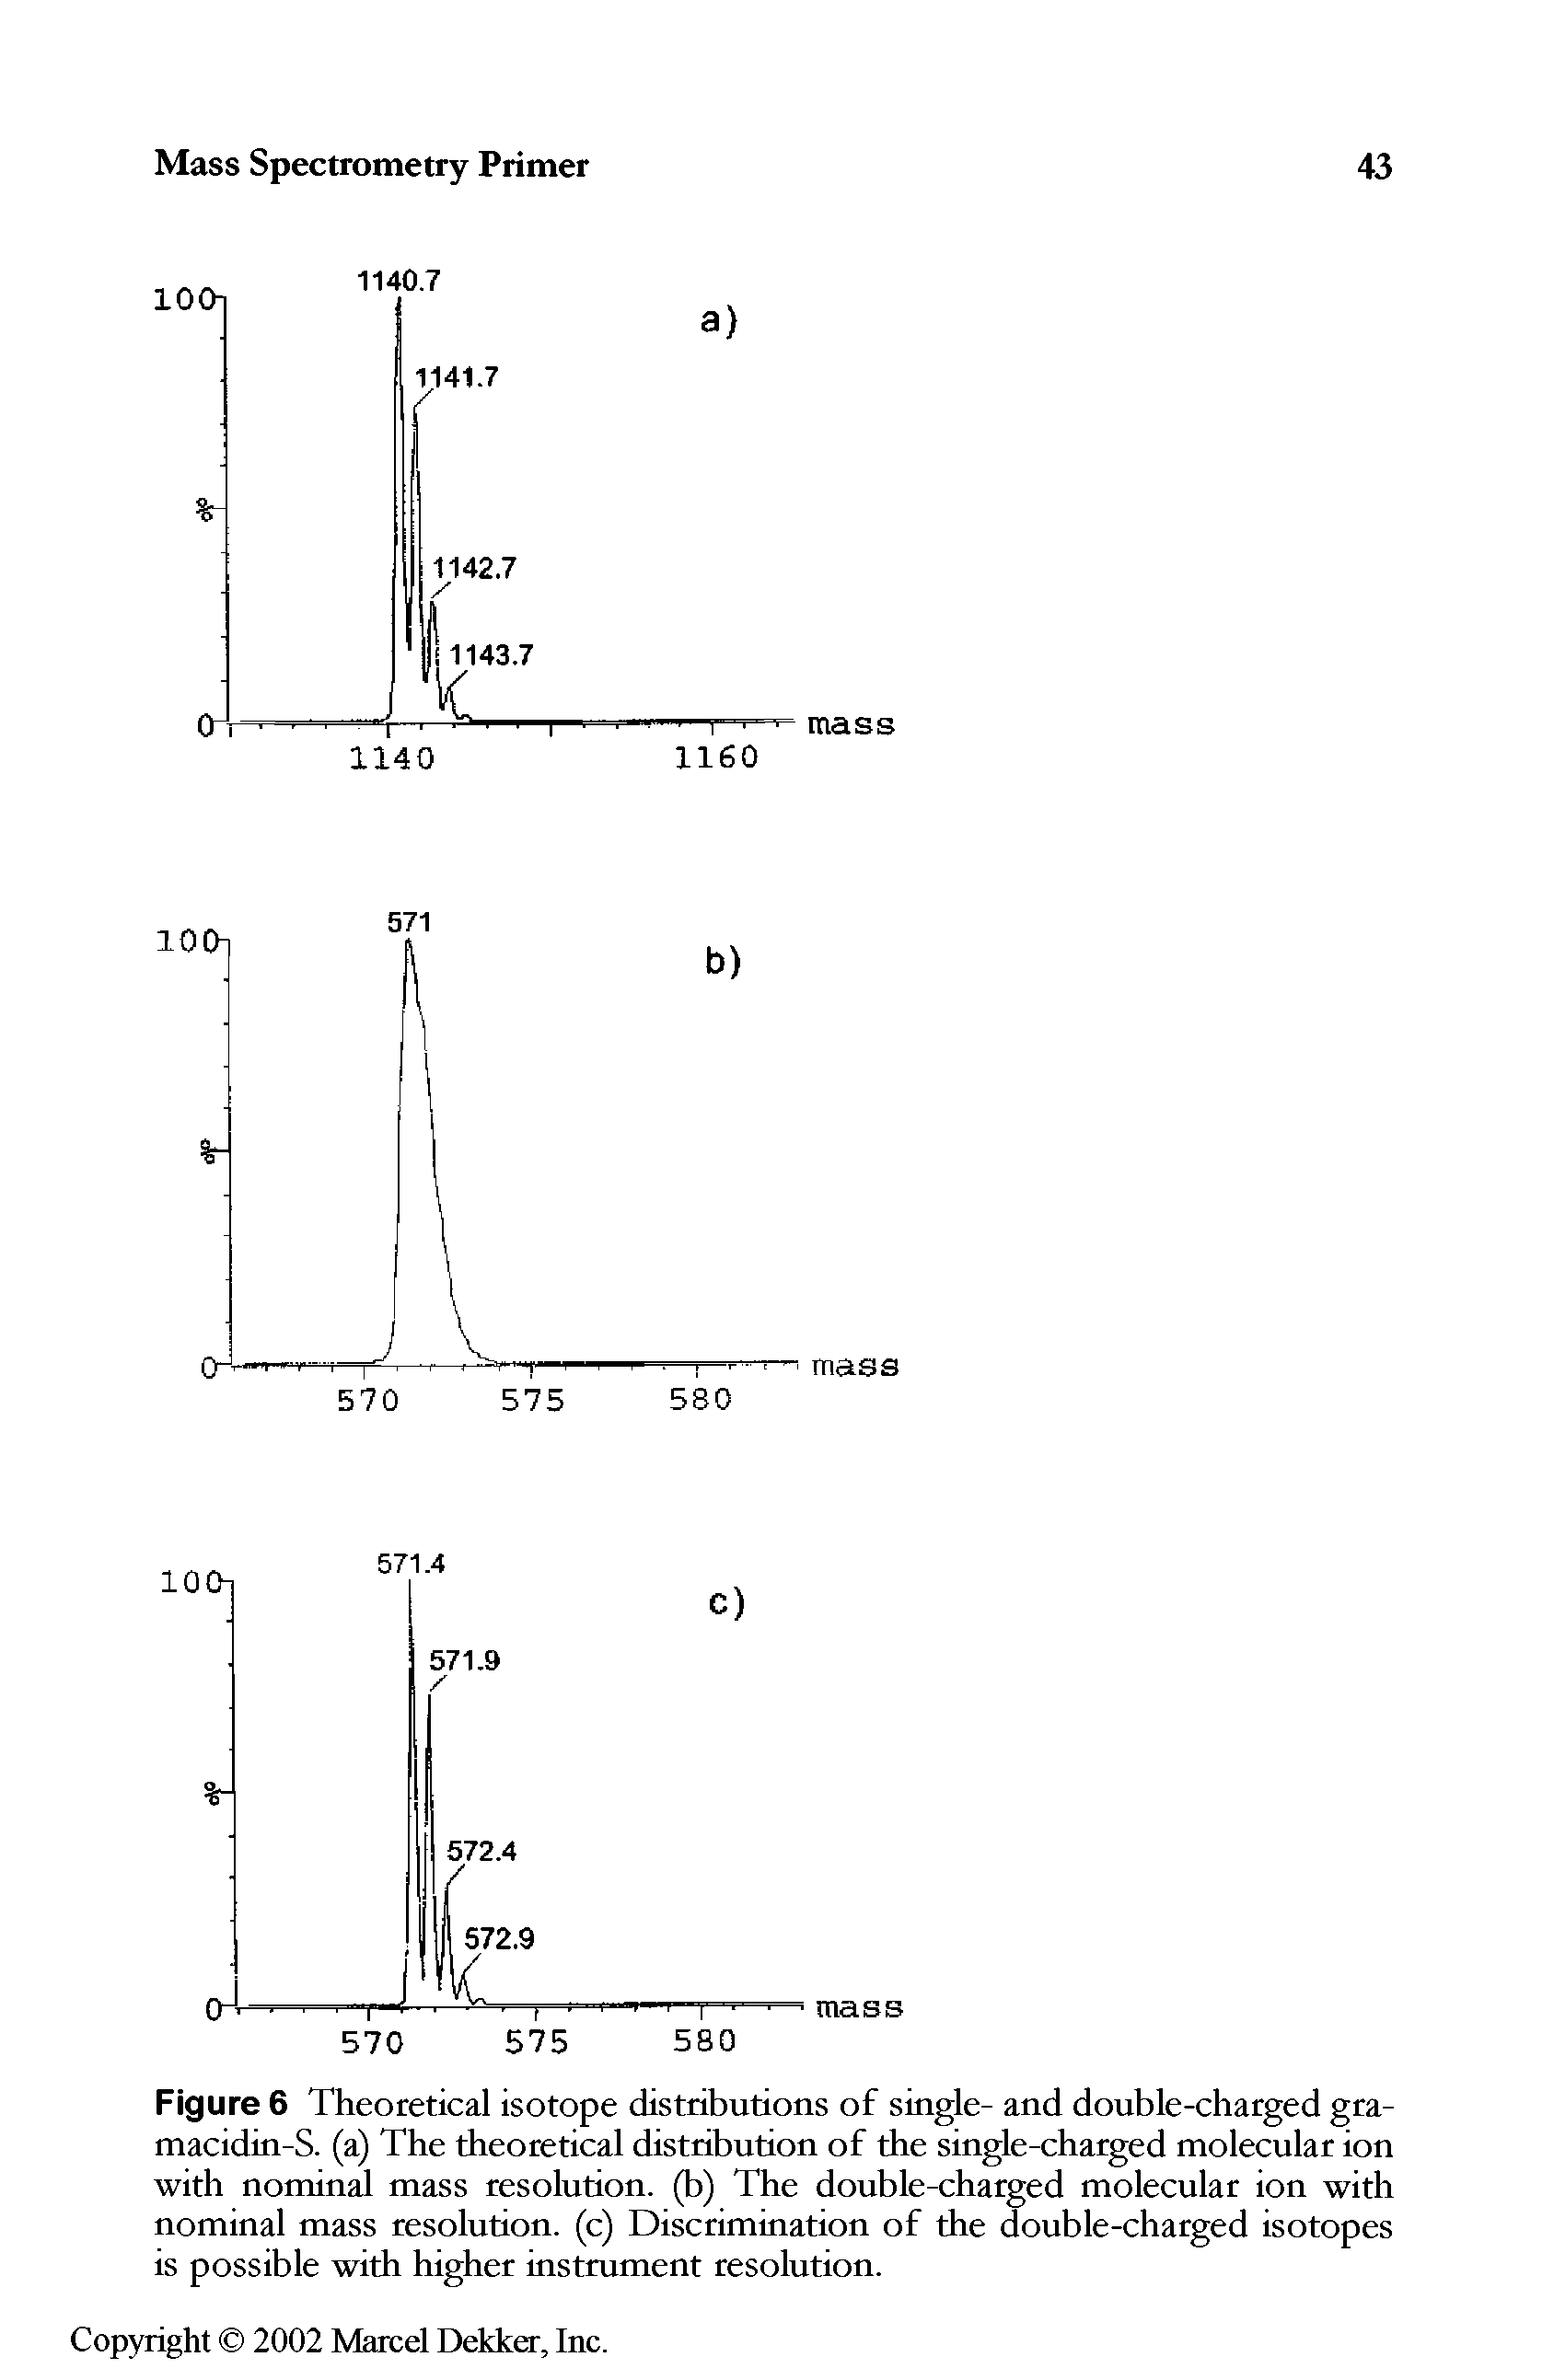 Figure 6 Theoretical isotope distributions of single- and double-charged gra-macidin-S. (a) The theoretical distribution of the single-charged molecular ion with nominal mass resolution, (b) The double-charged molecular ion with nominal mass resolution, (c) Discrimination of the double-charged isotopes is possible with higher instrument resolution.